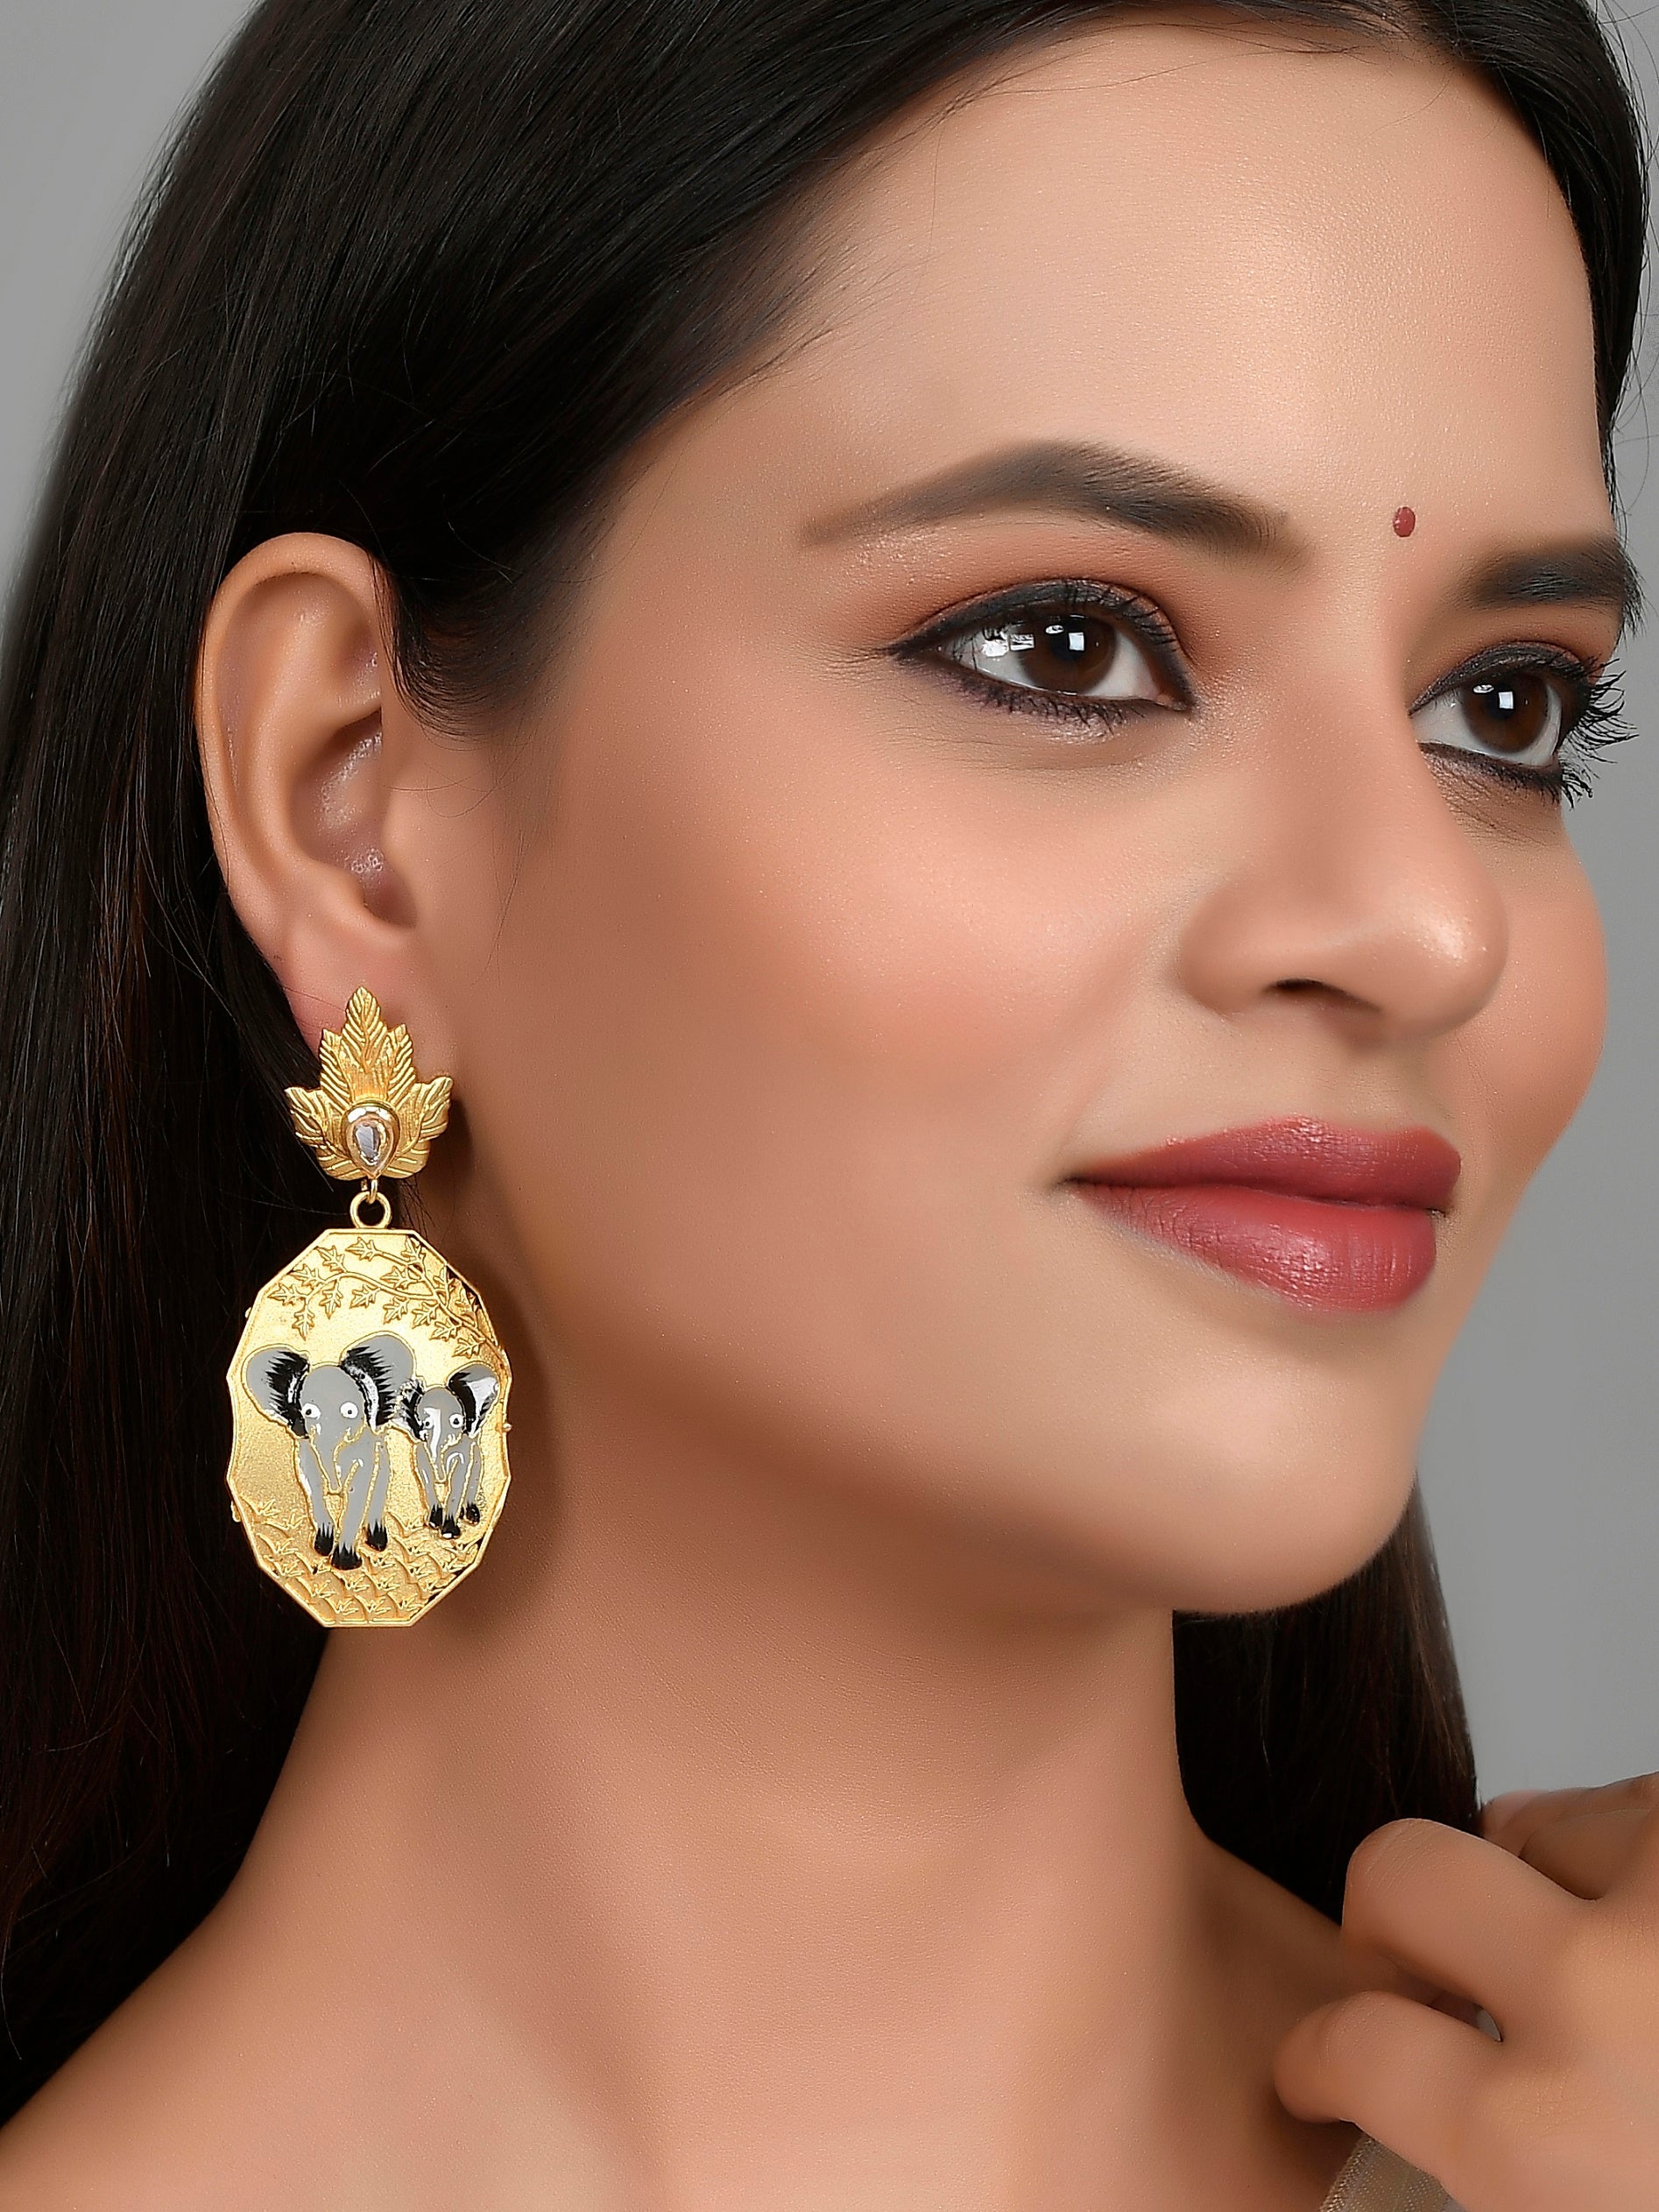 Gold Plated Hand Painted Ethnic Drop Earrings